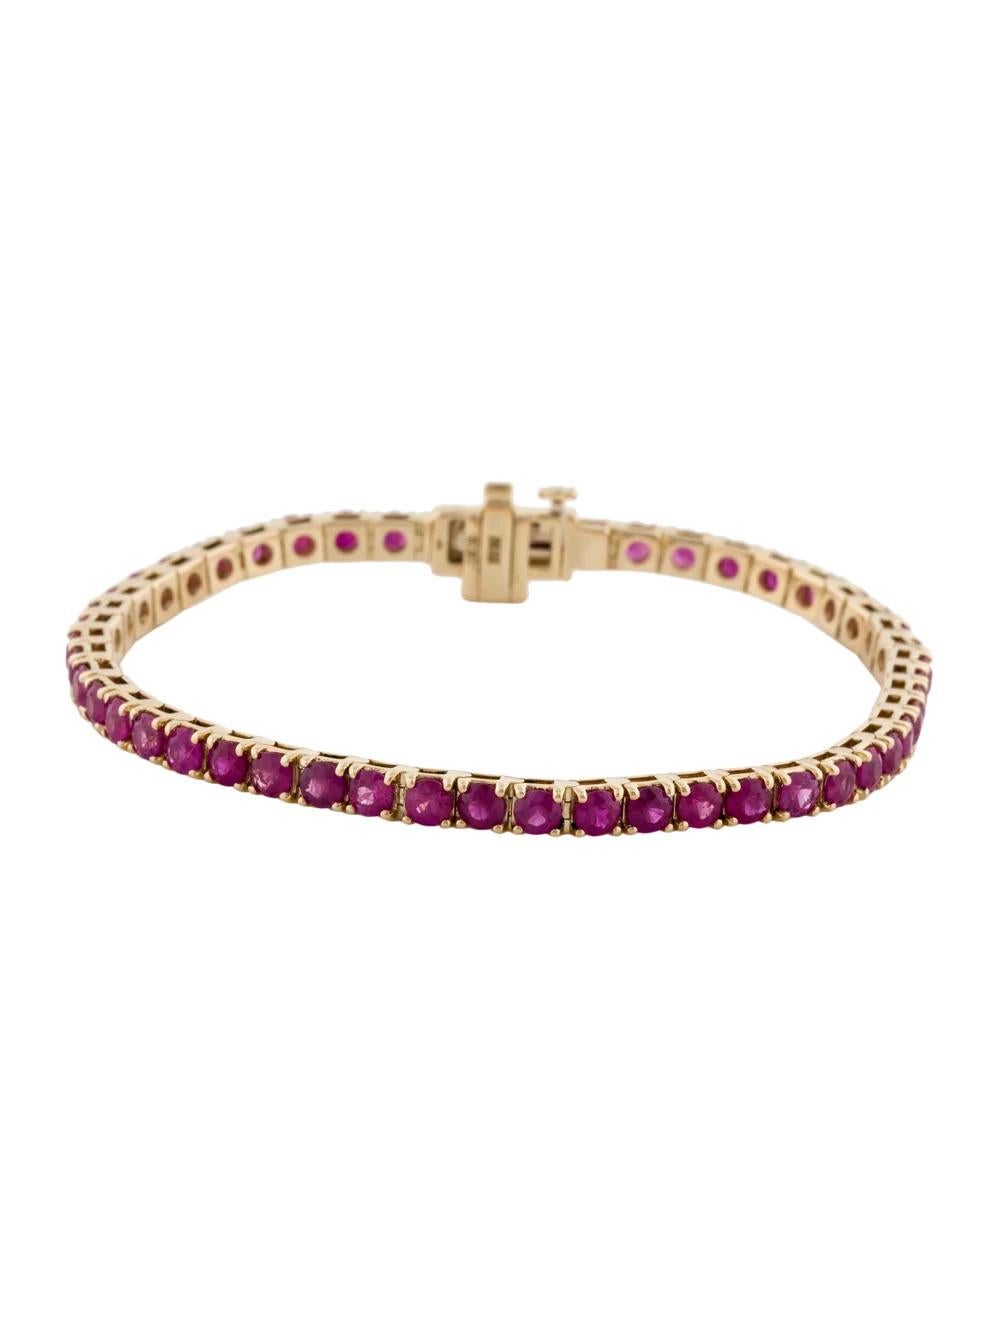 Elevate your wrist game with this exquisite 14K Yellow Gold Ruby Tennis Bracelet. Each bracelet features a stunning 7.20 Carat Round Modified Brilliant Ruby, creating a captivating and luxurious look.

Specifications:

* Metal Type: 14K Yellow